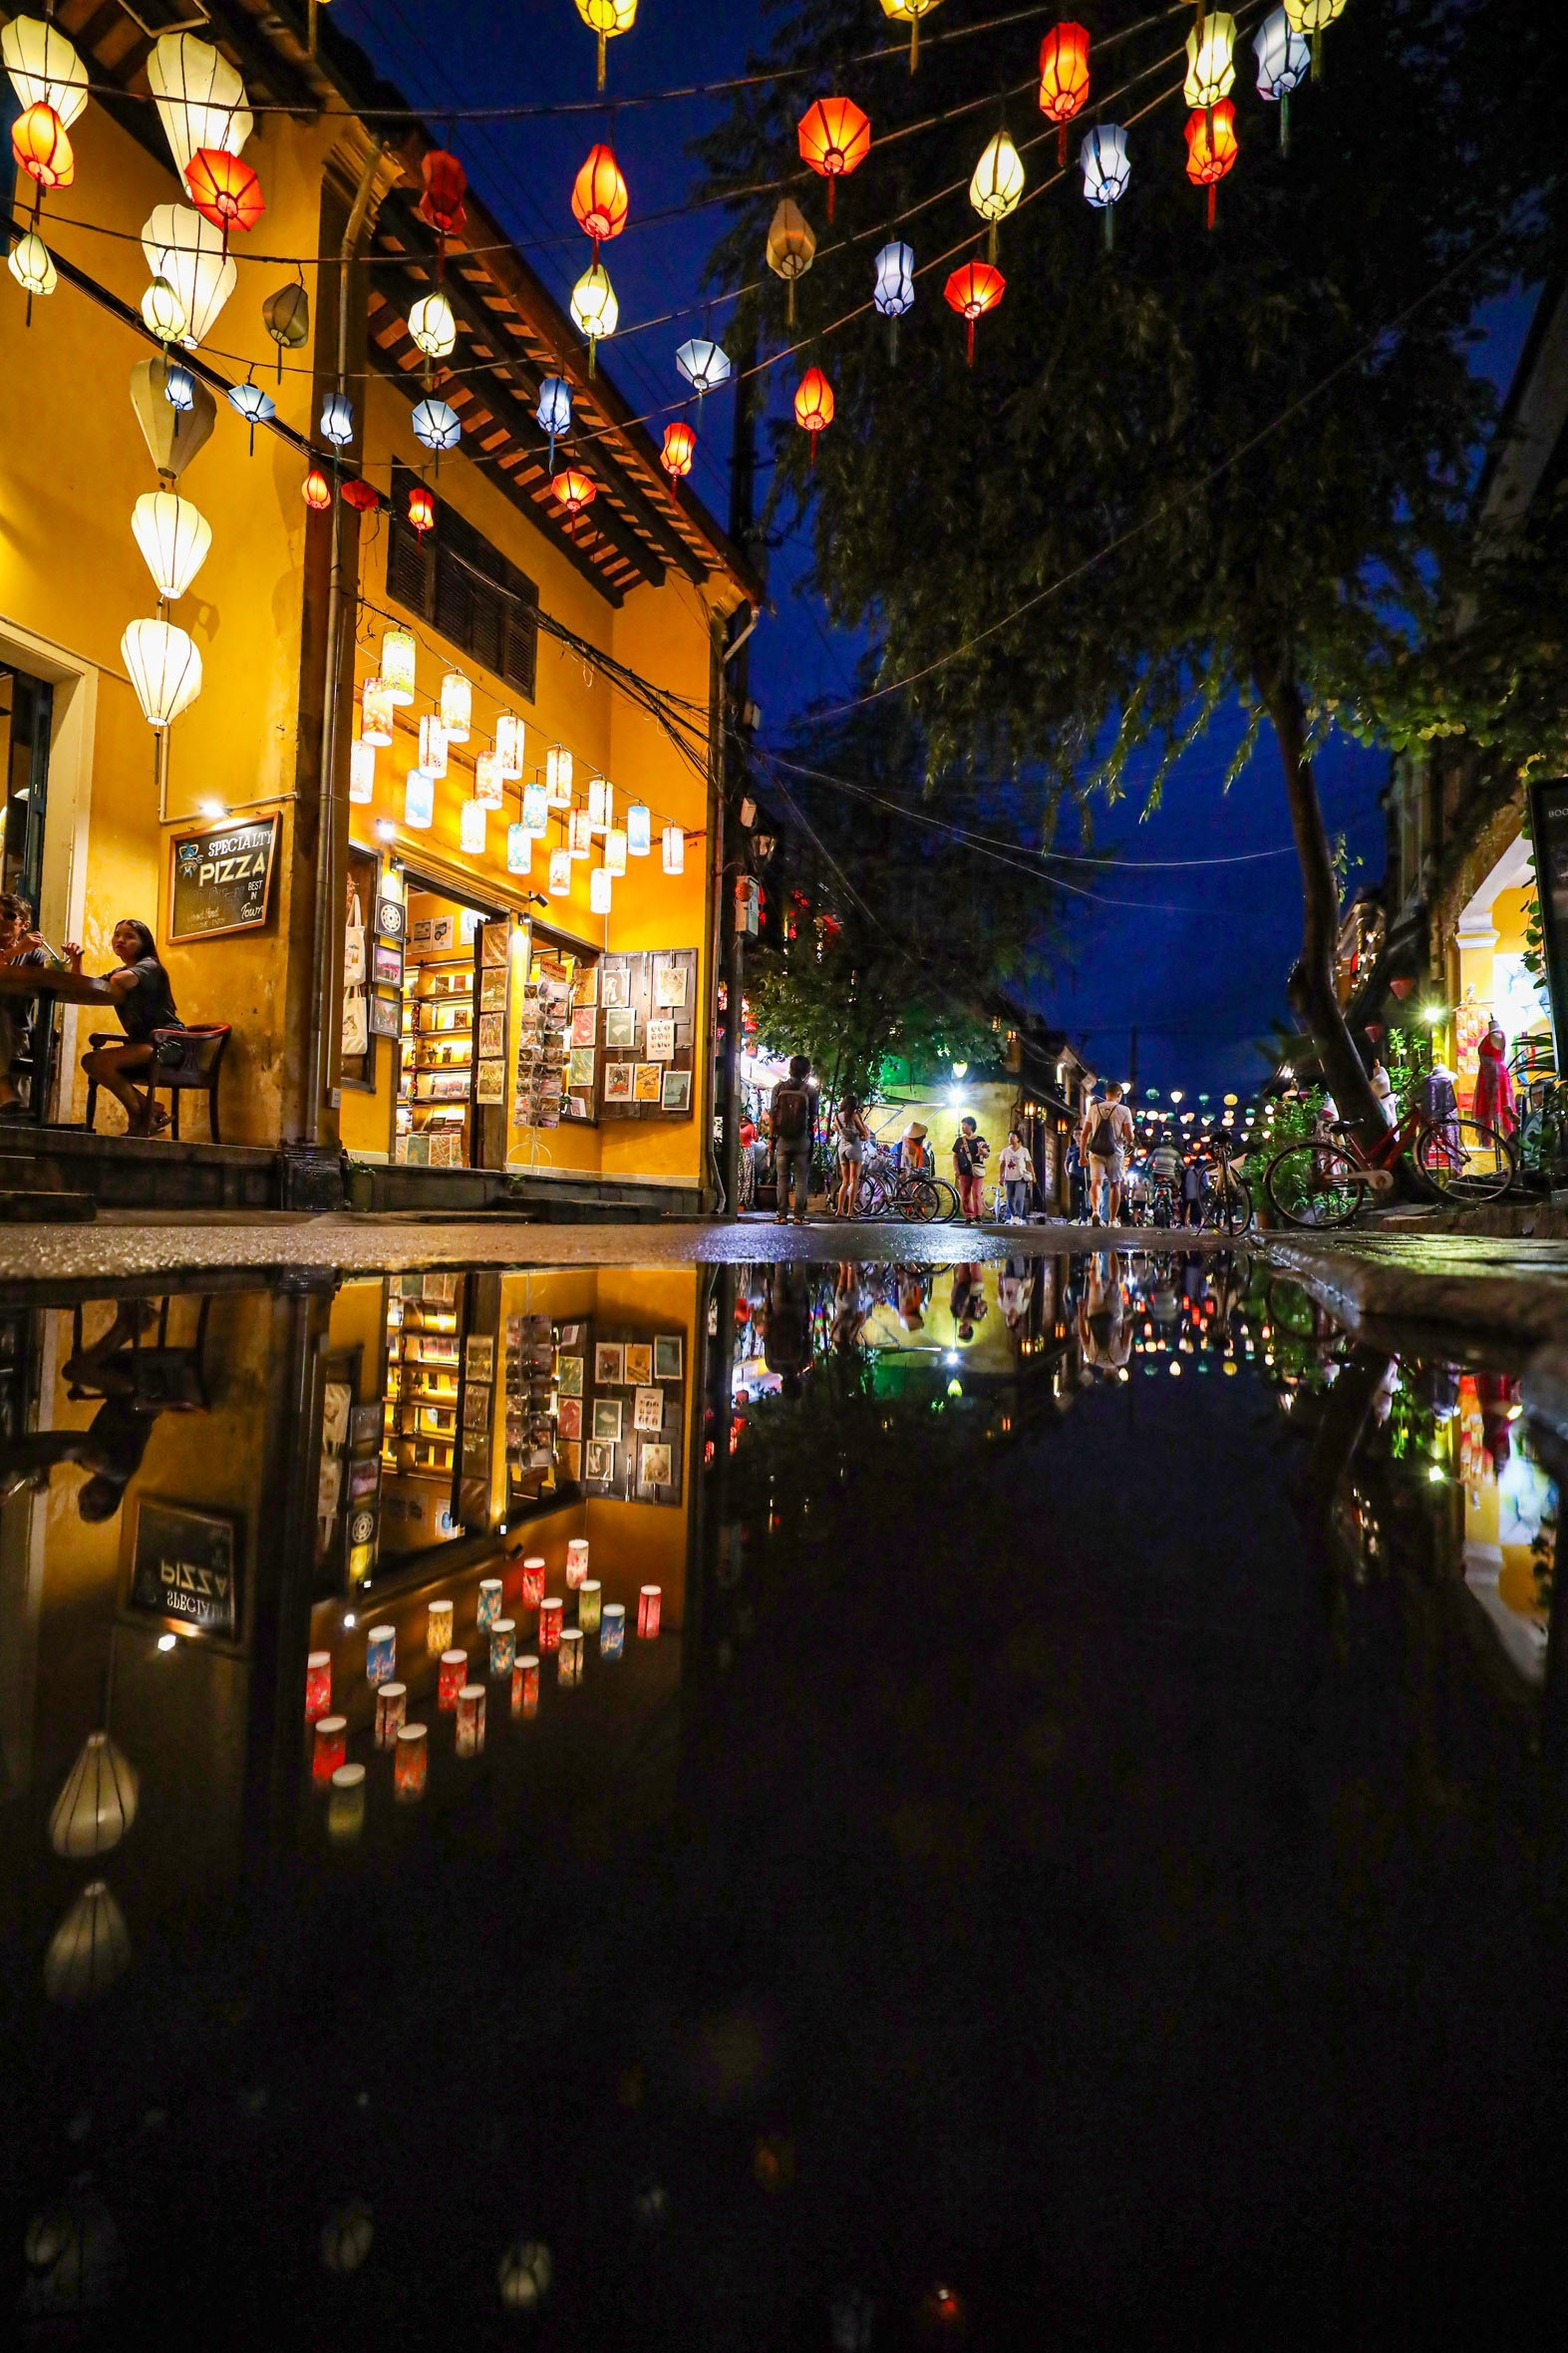 Hoi An ancient town reflected in rainwater puddles